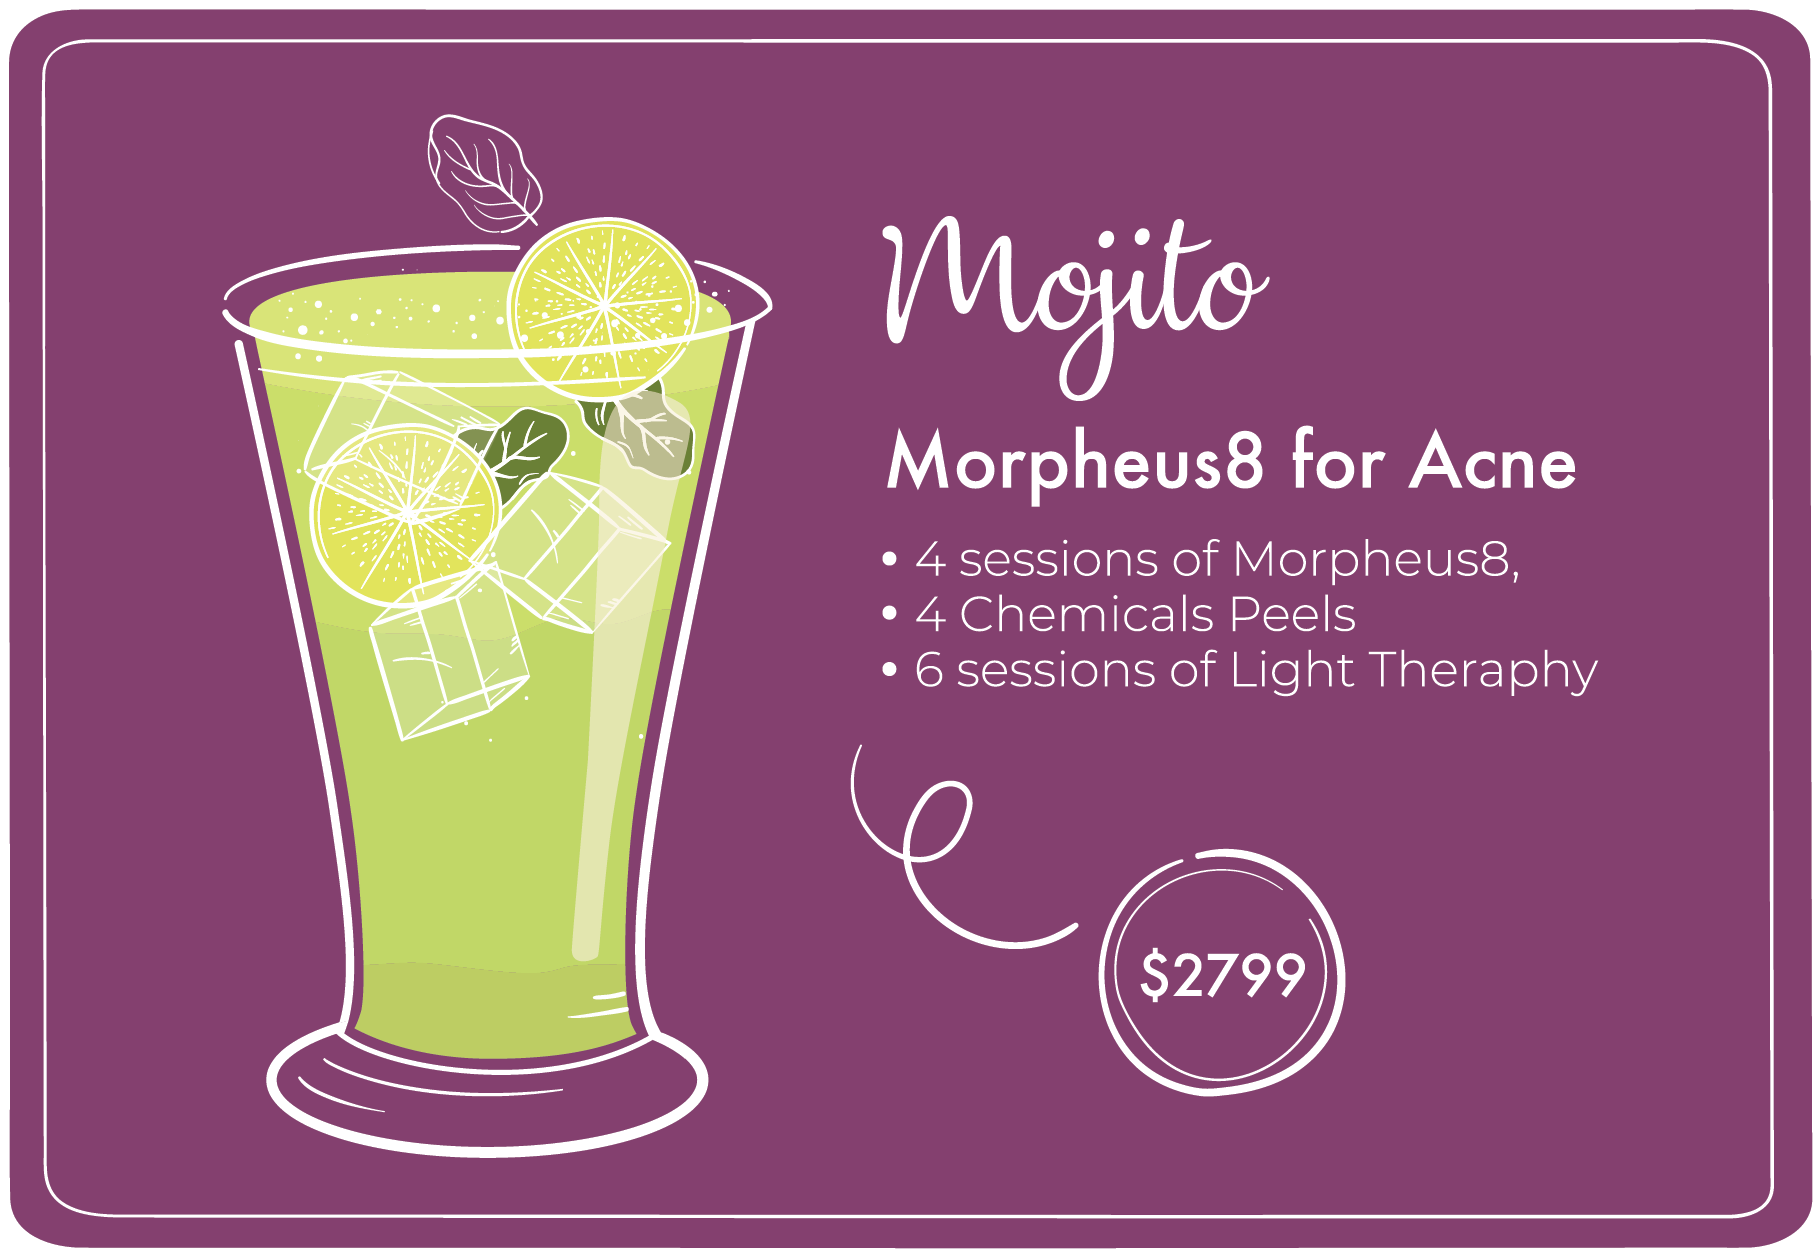 Cocktail Menu for Beauty Services - Mojito